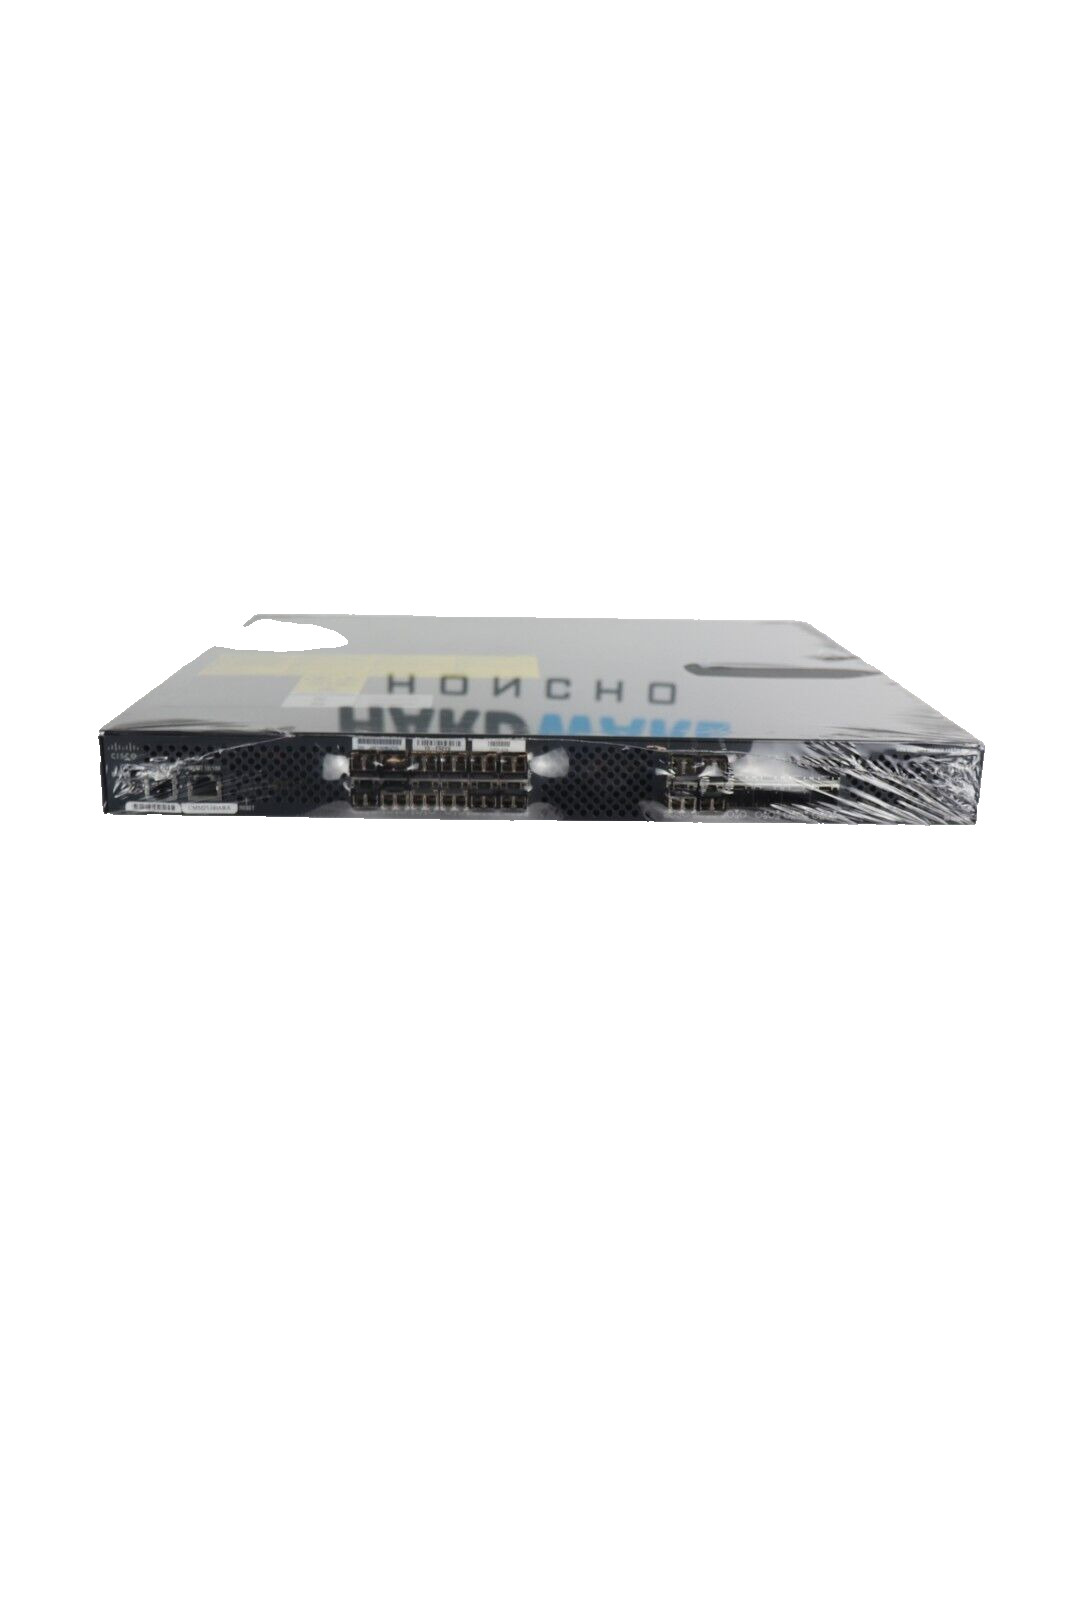 Cisco  DS-C9124-K9 MDS 9124 24-port 4Gbps FC switch  (8-port base config)